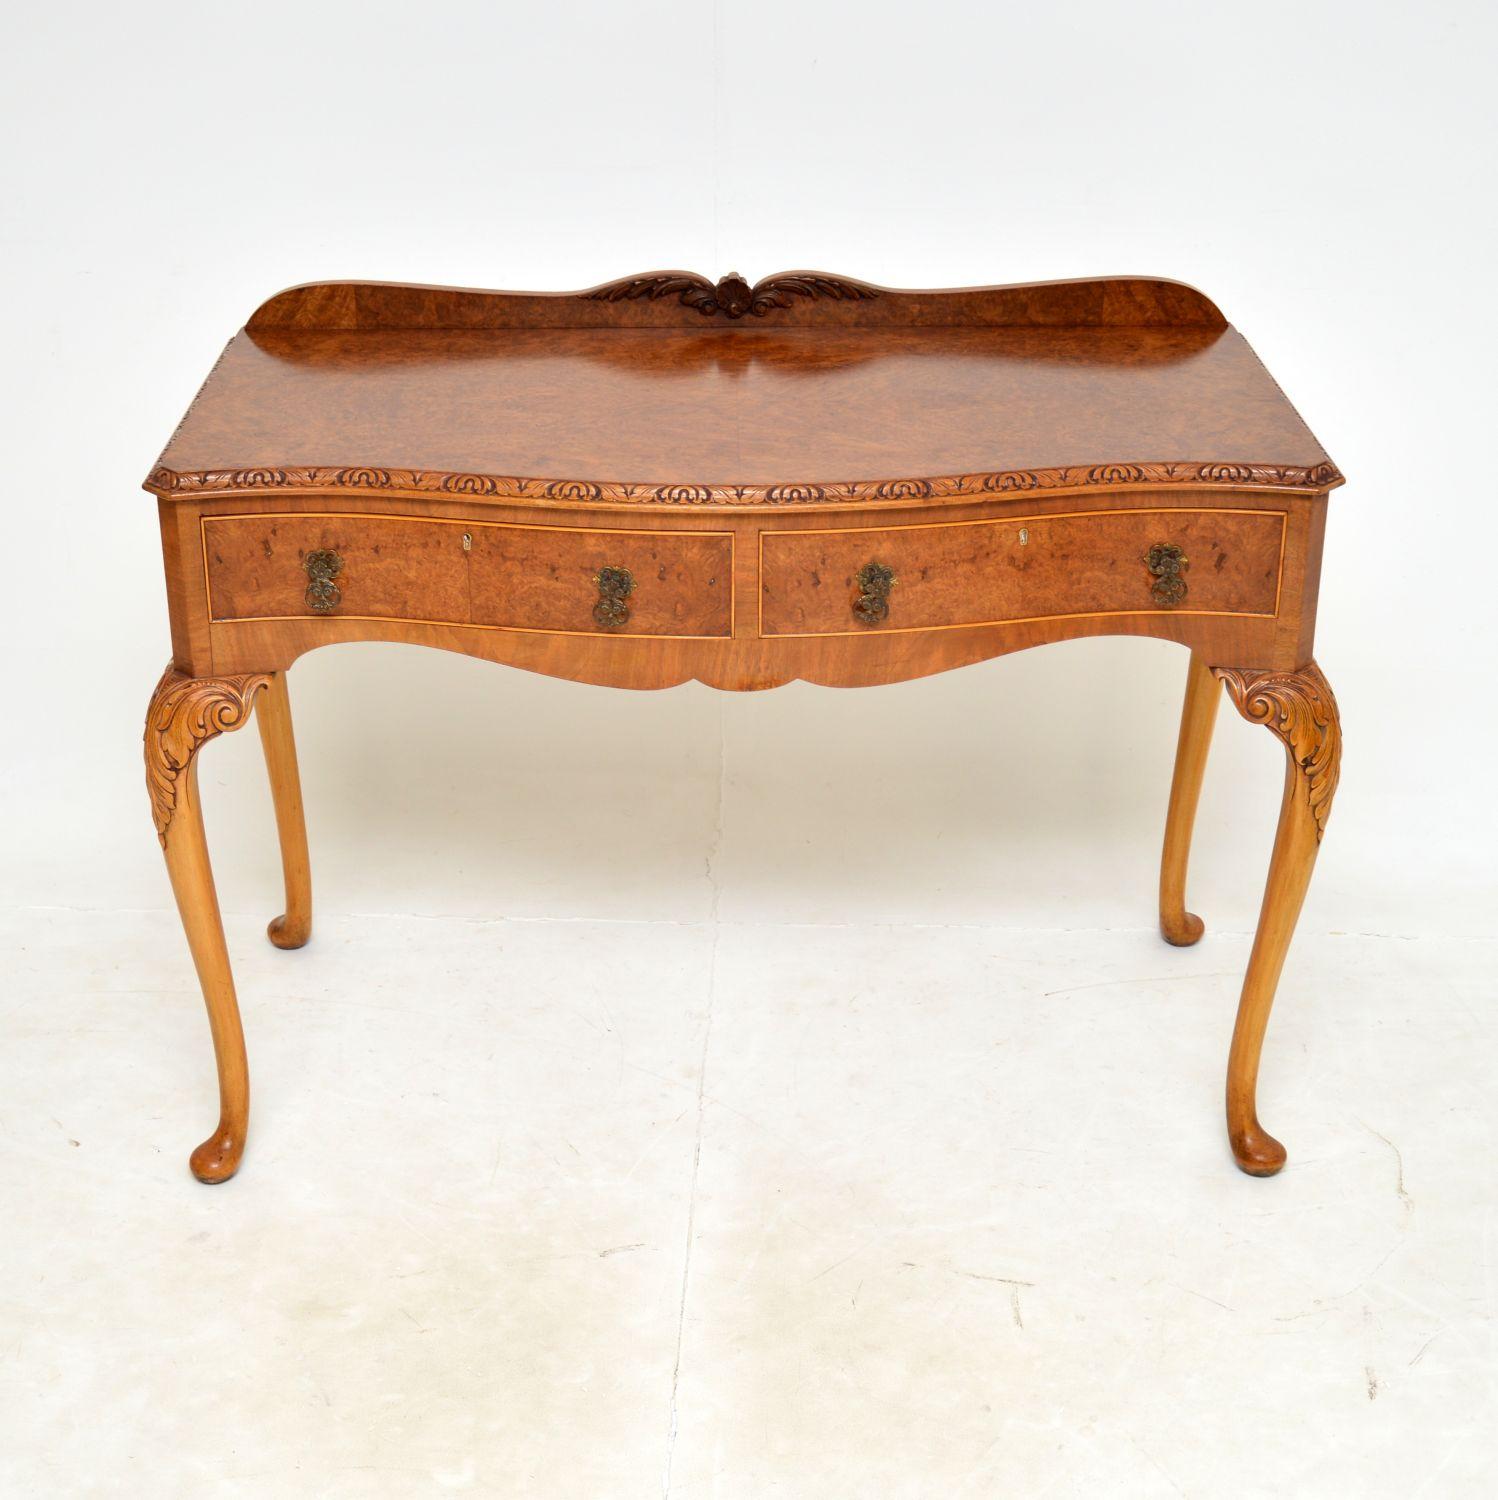 A superb antique burr walnut console server table in the Queen Anne style. This was made in England, it dates from the 1920-1930s.

The quality is outstanding, this has stunning burr walnut grain patterns and beautiful, crisp carving throughout.